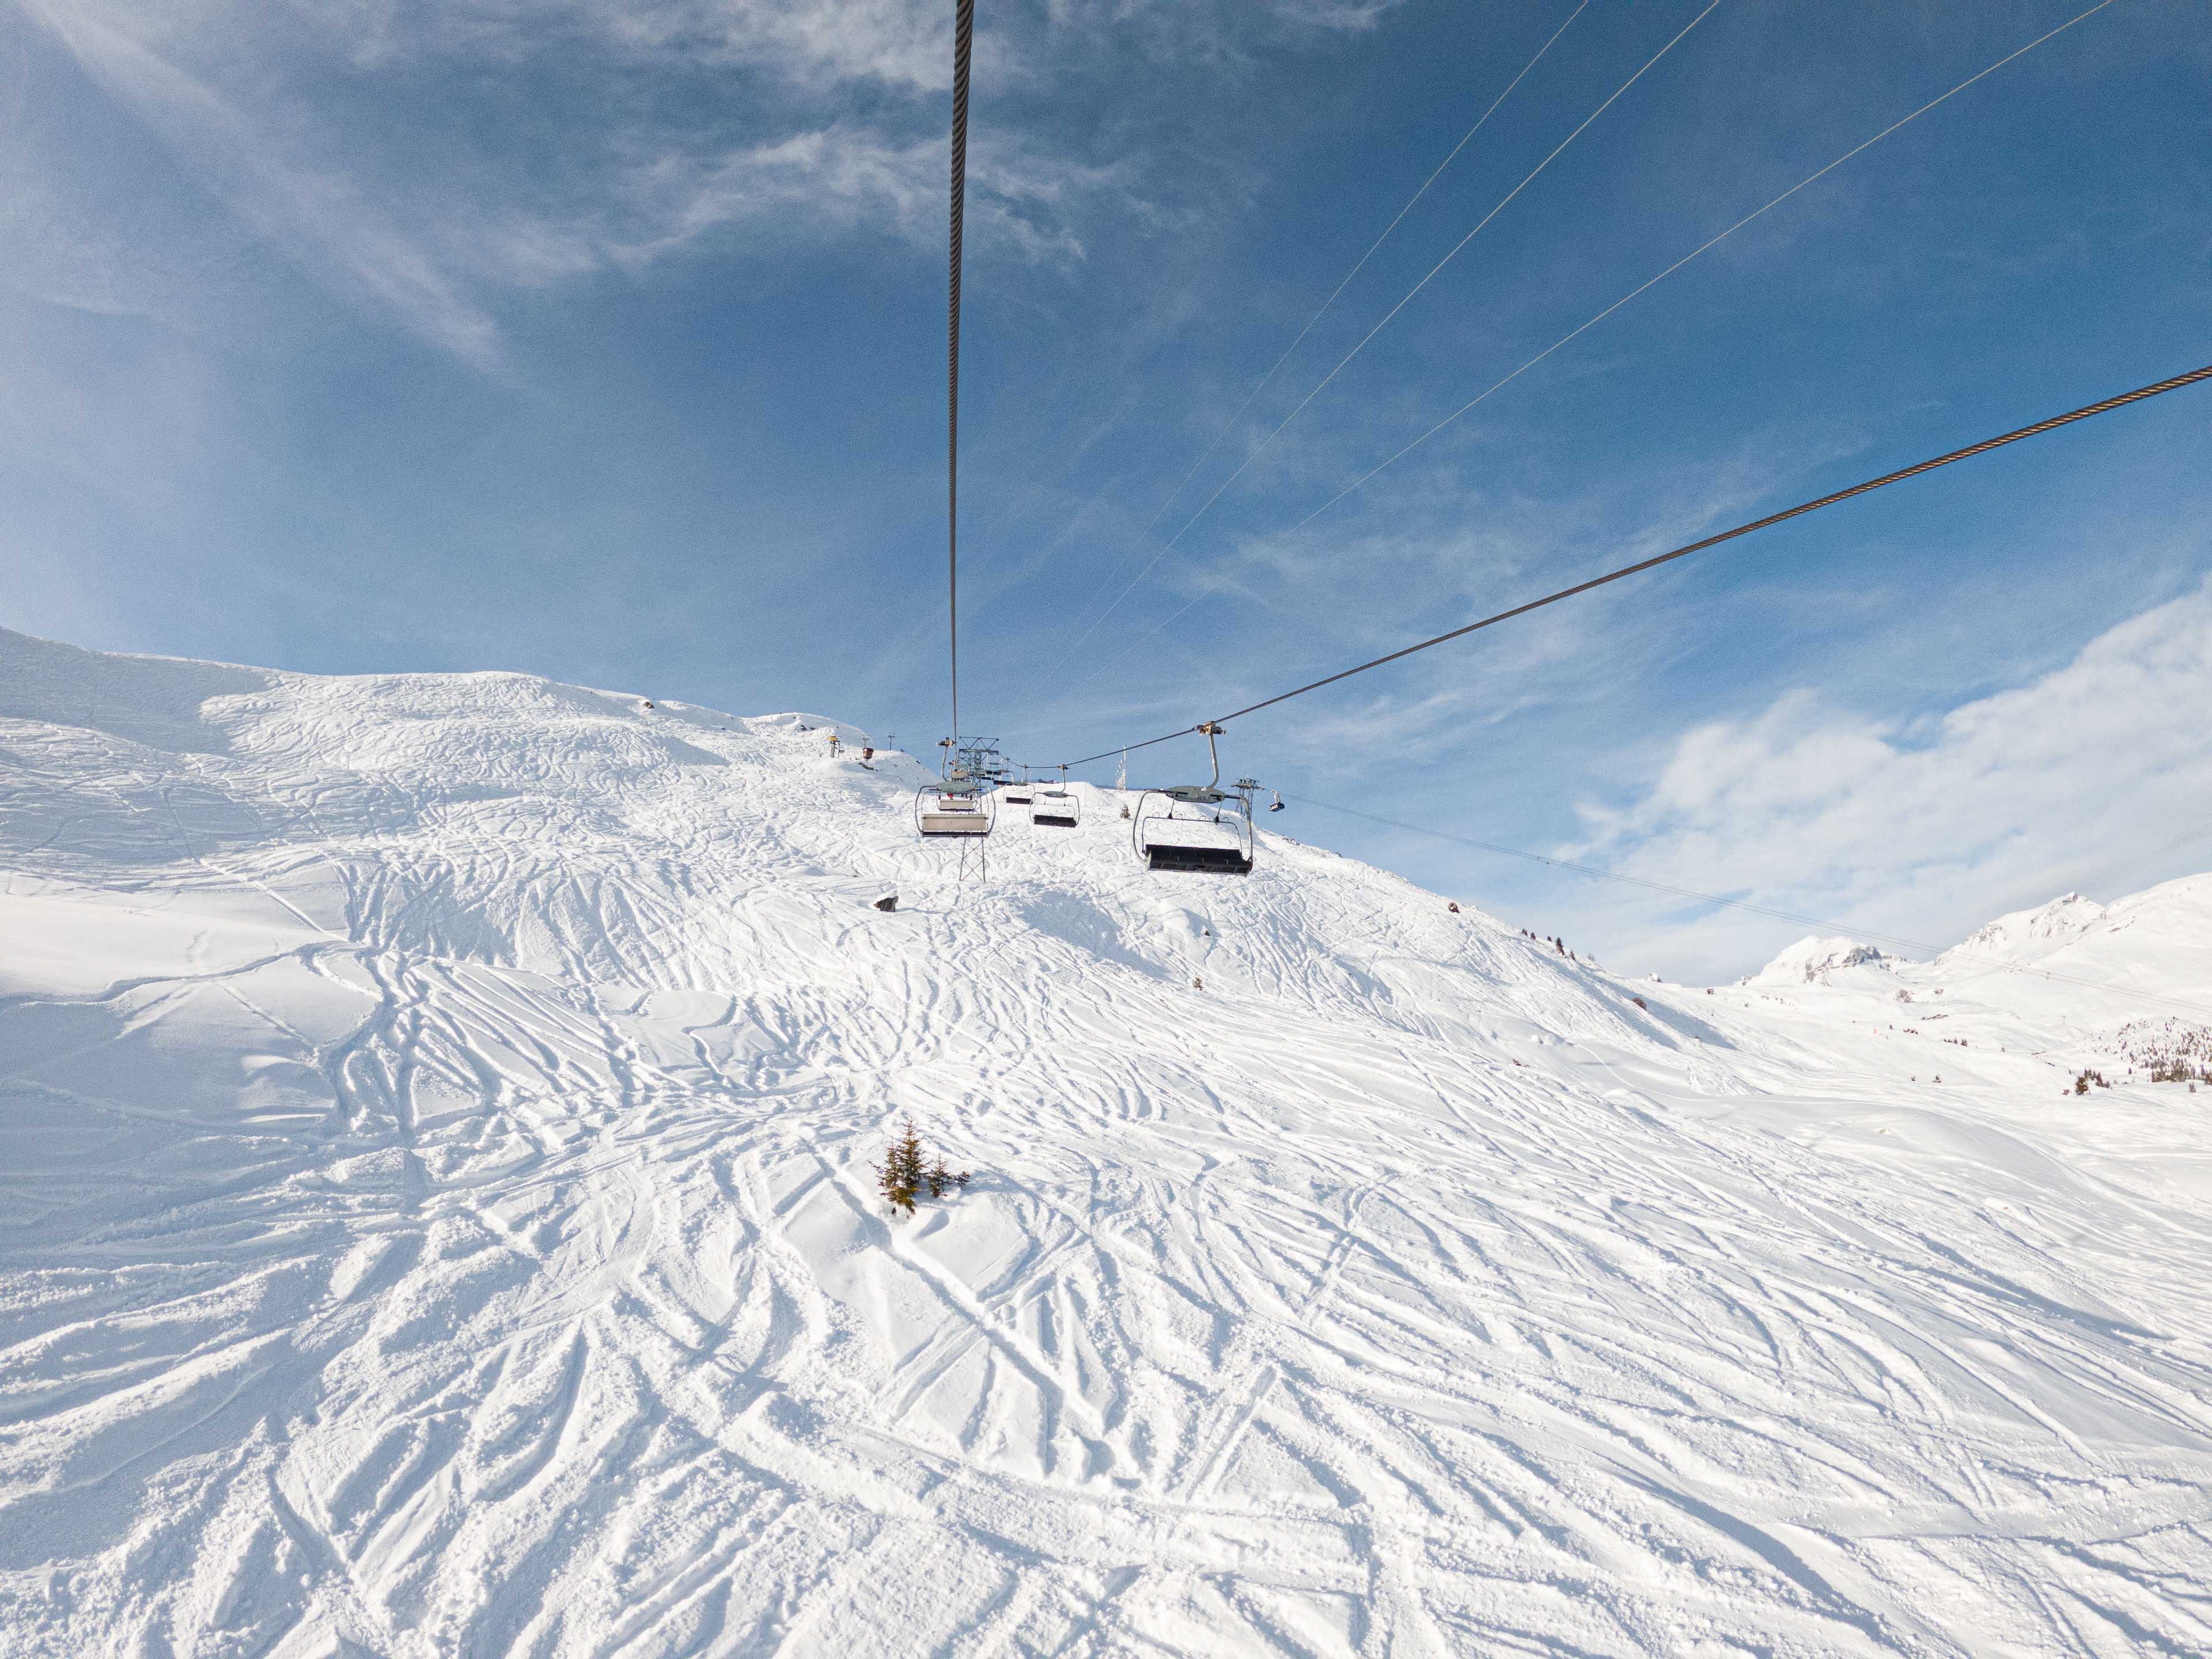 Older Curnius-Crap Sogn Gion chairlift, Falera-Laax